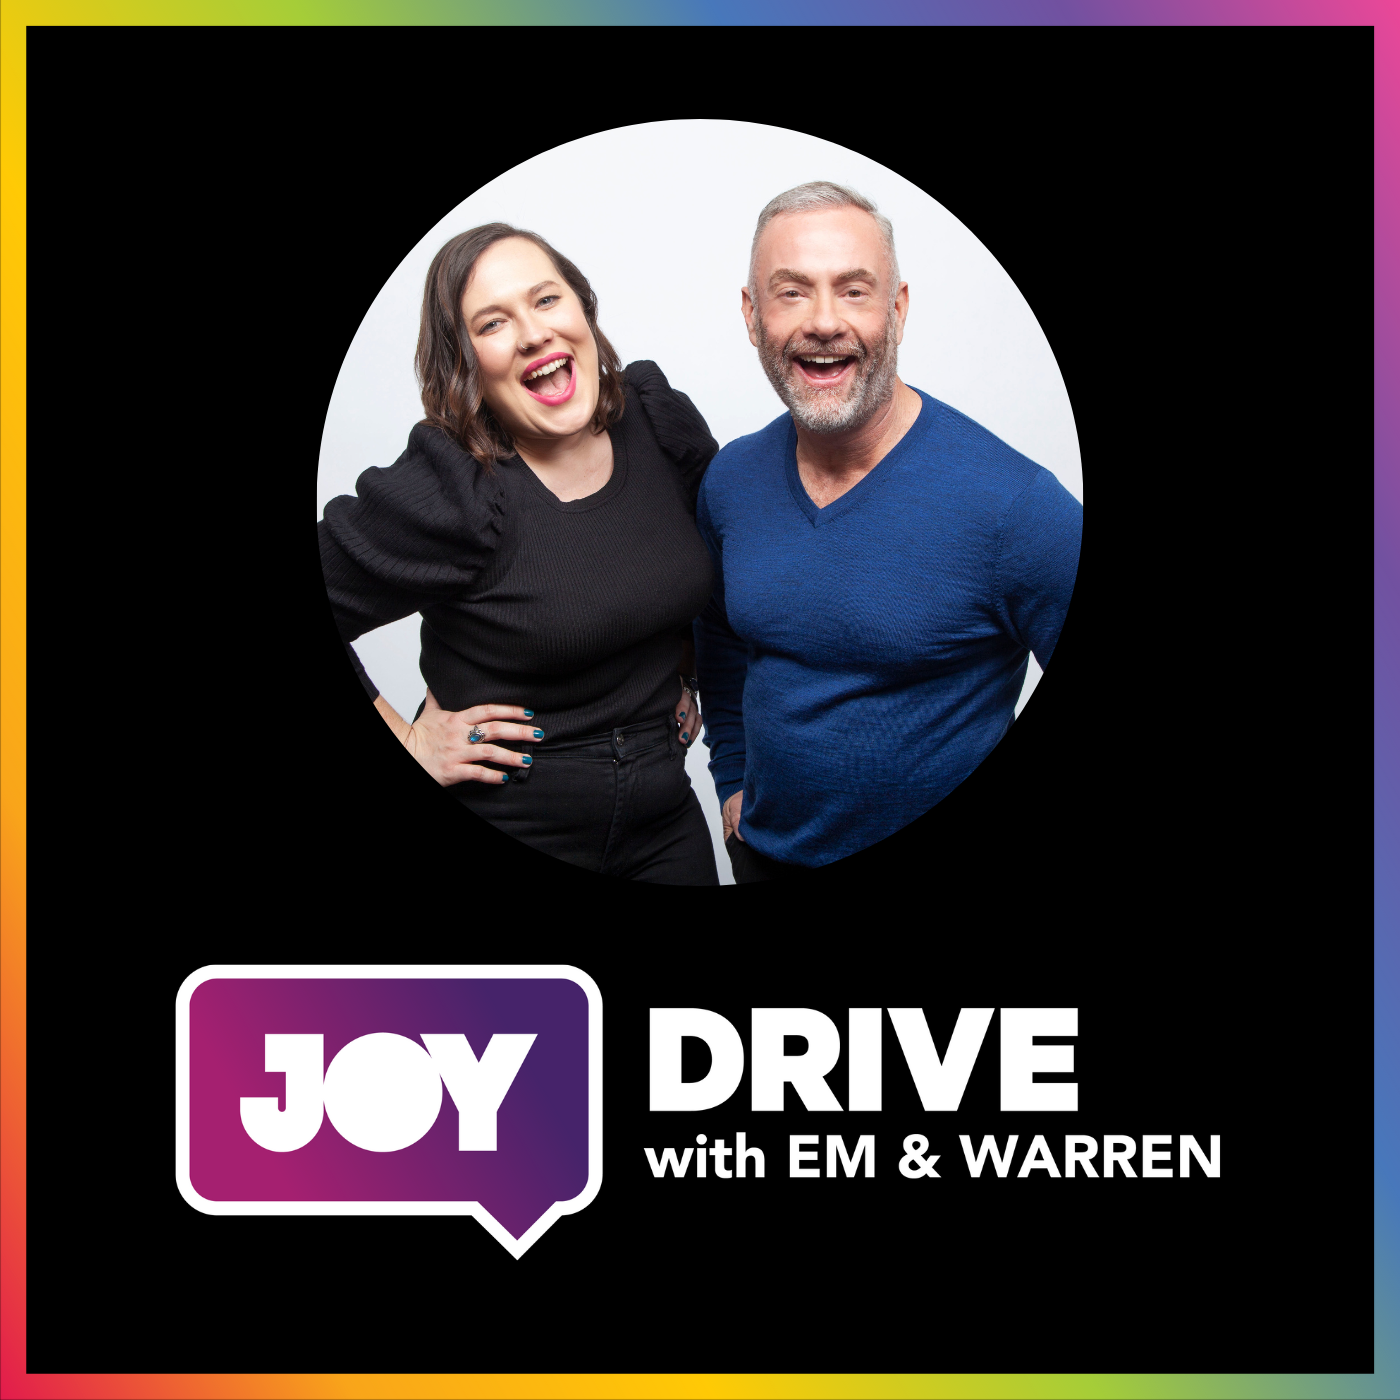 Jo Caust x JOY Drive: New National Cultural Policy